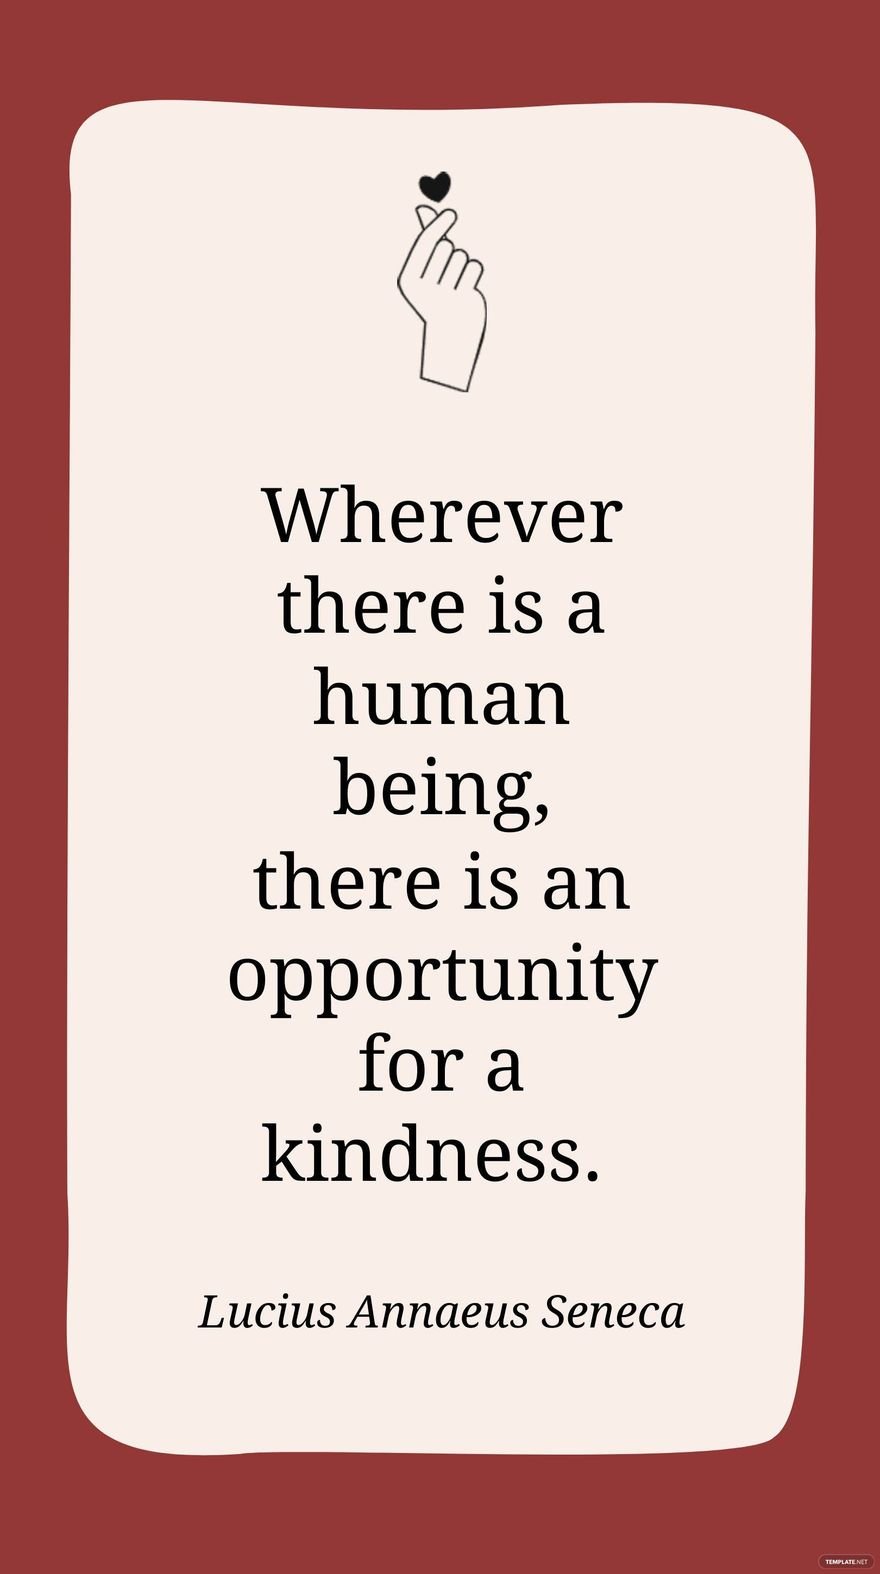 Free Lucius Annaeus Seneca - Wherever there is a human being, there is an opportunity for a kindness. in JPG